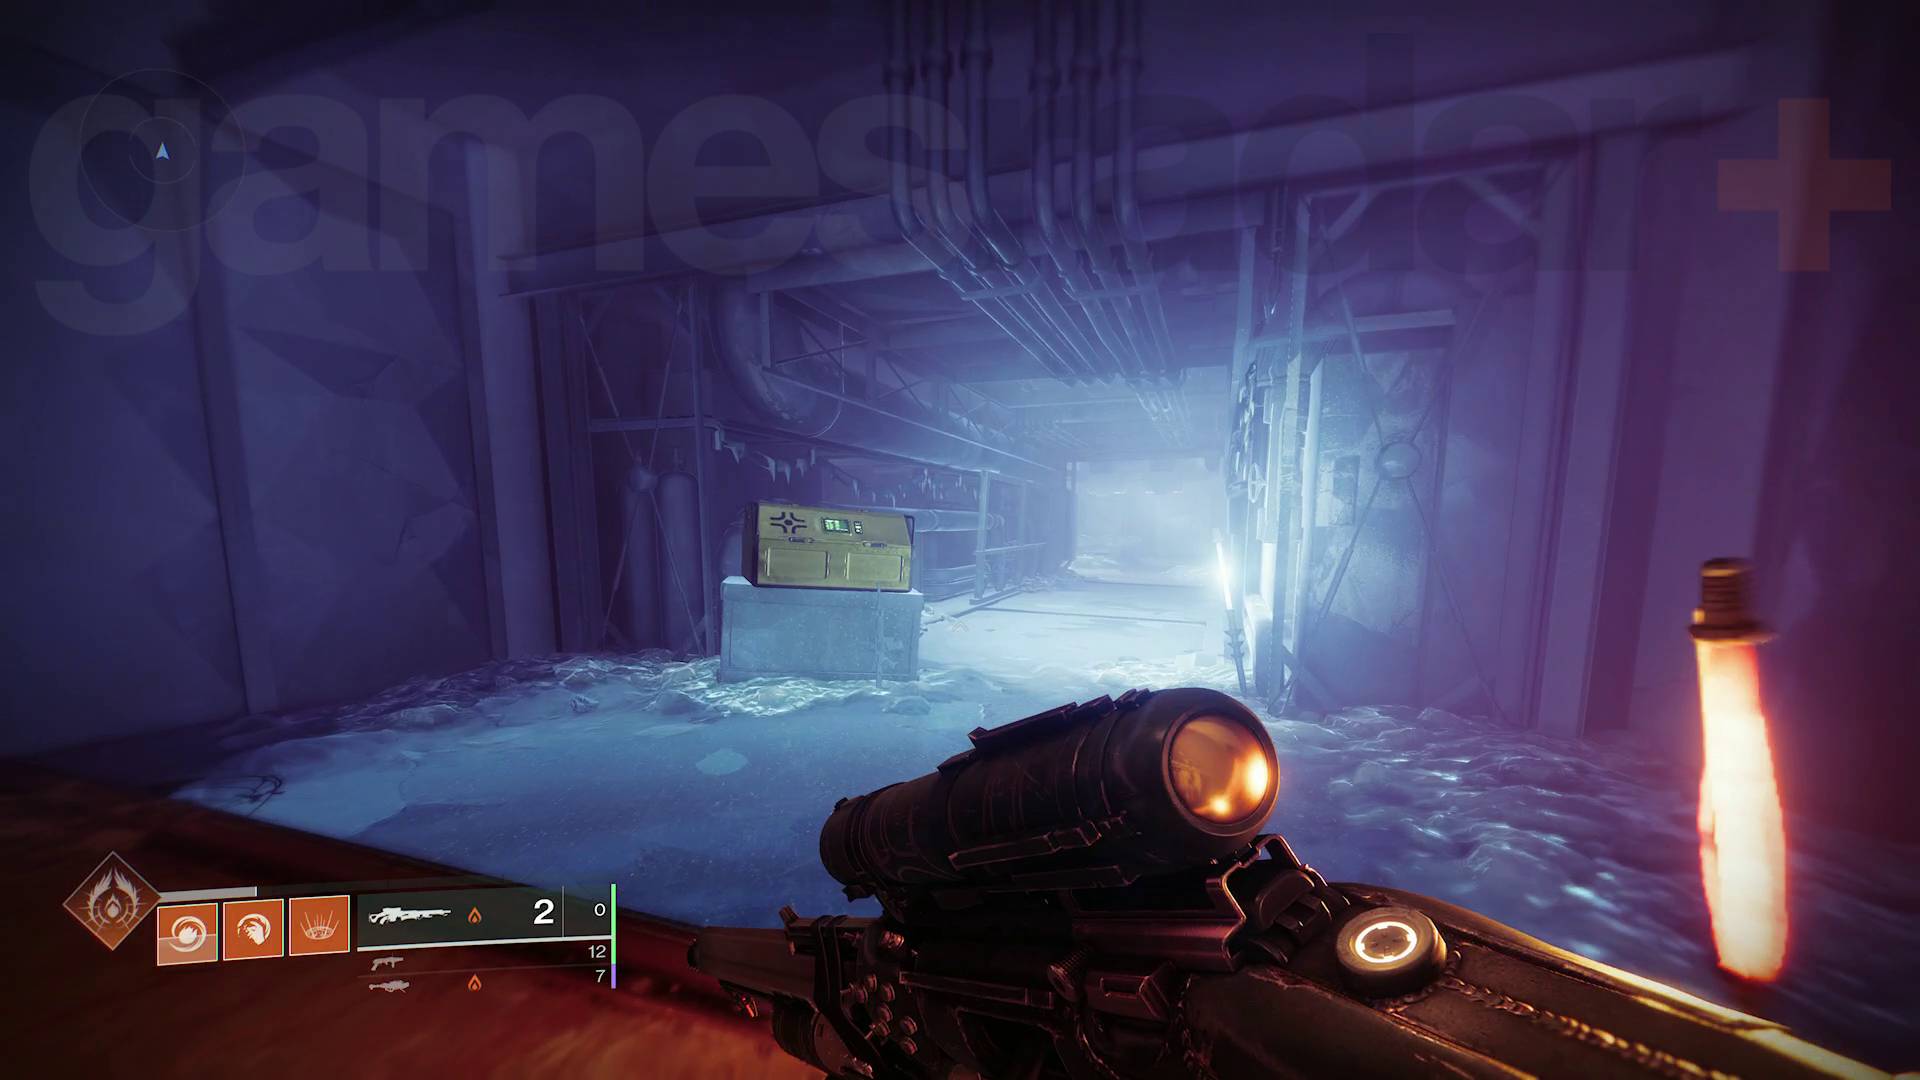 Destiny 2 Lost Encryption Code chest in the Divide wall